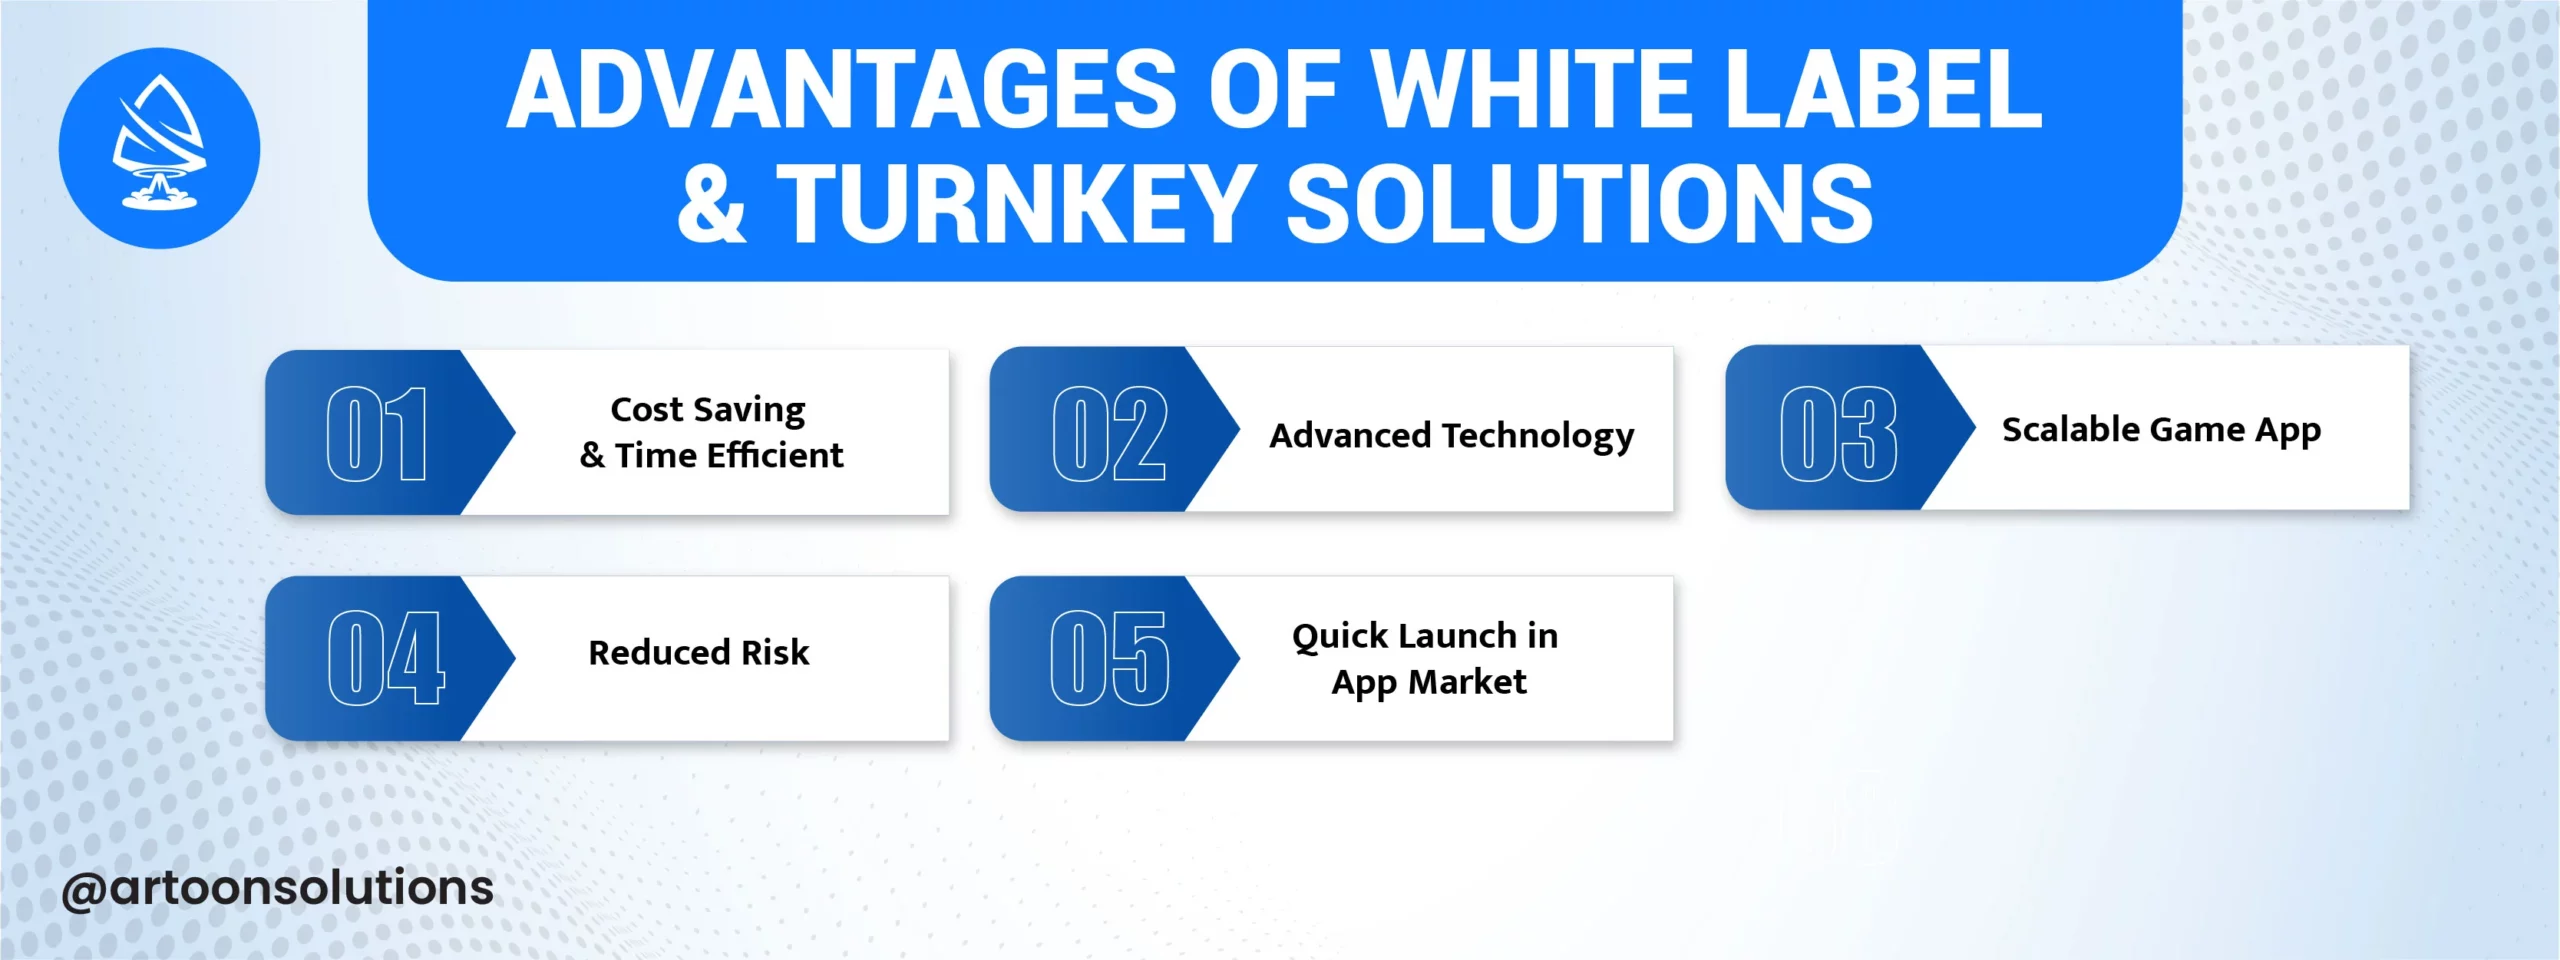 advantages of white label solutions